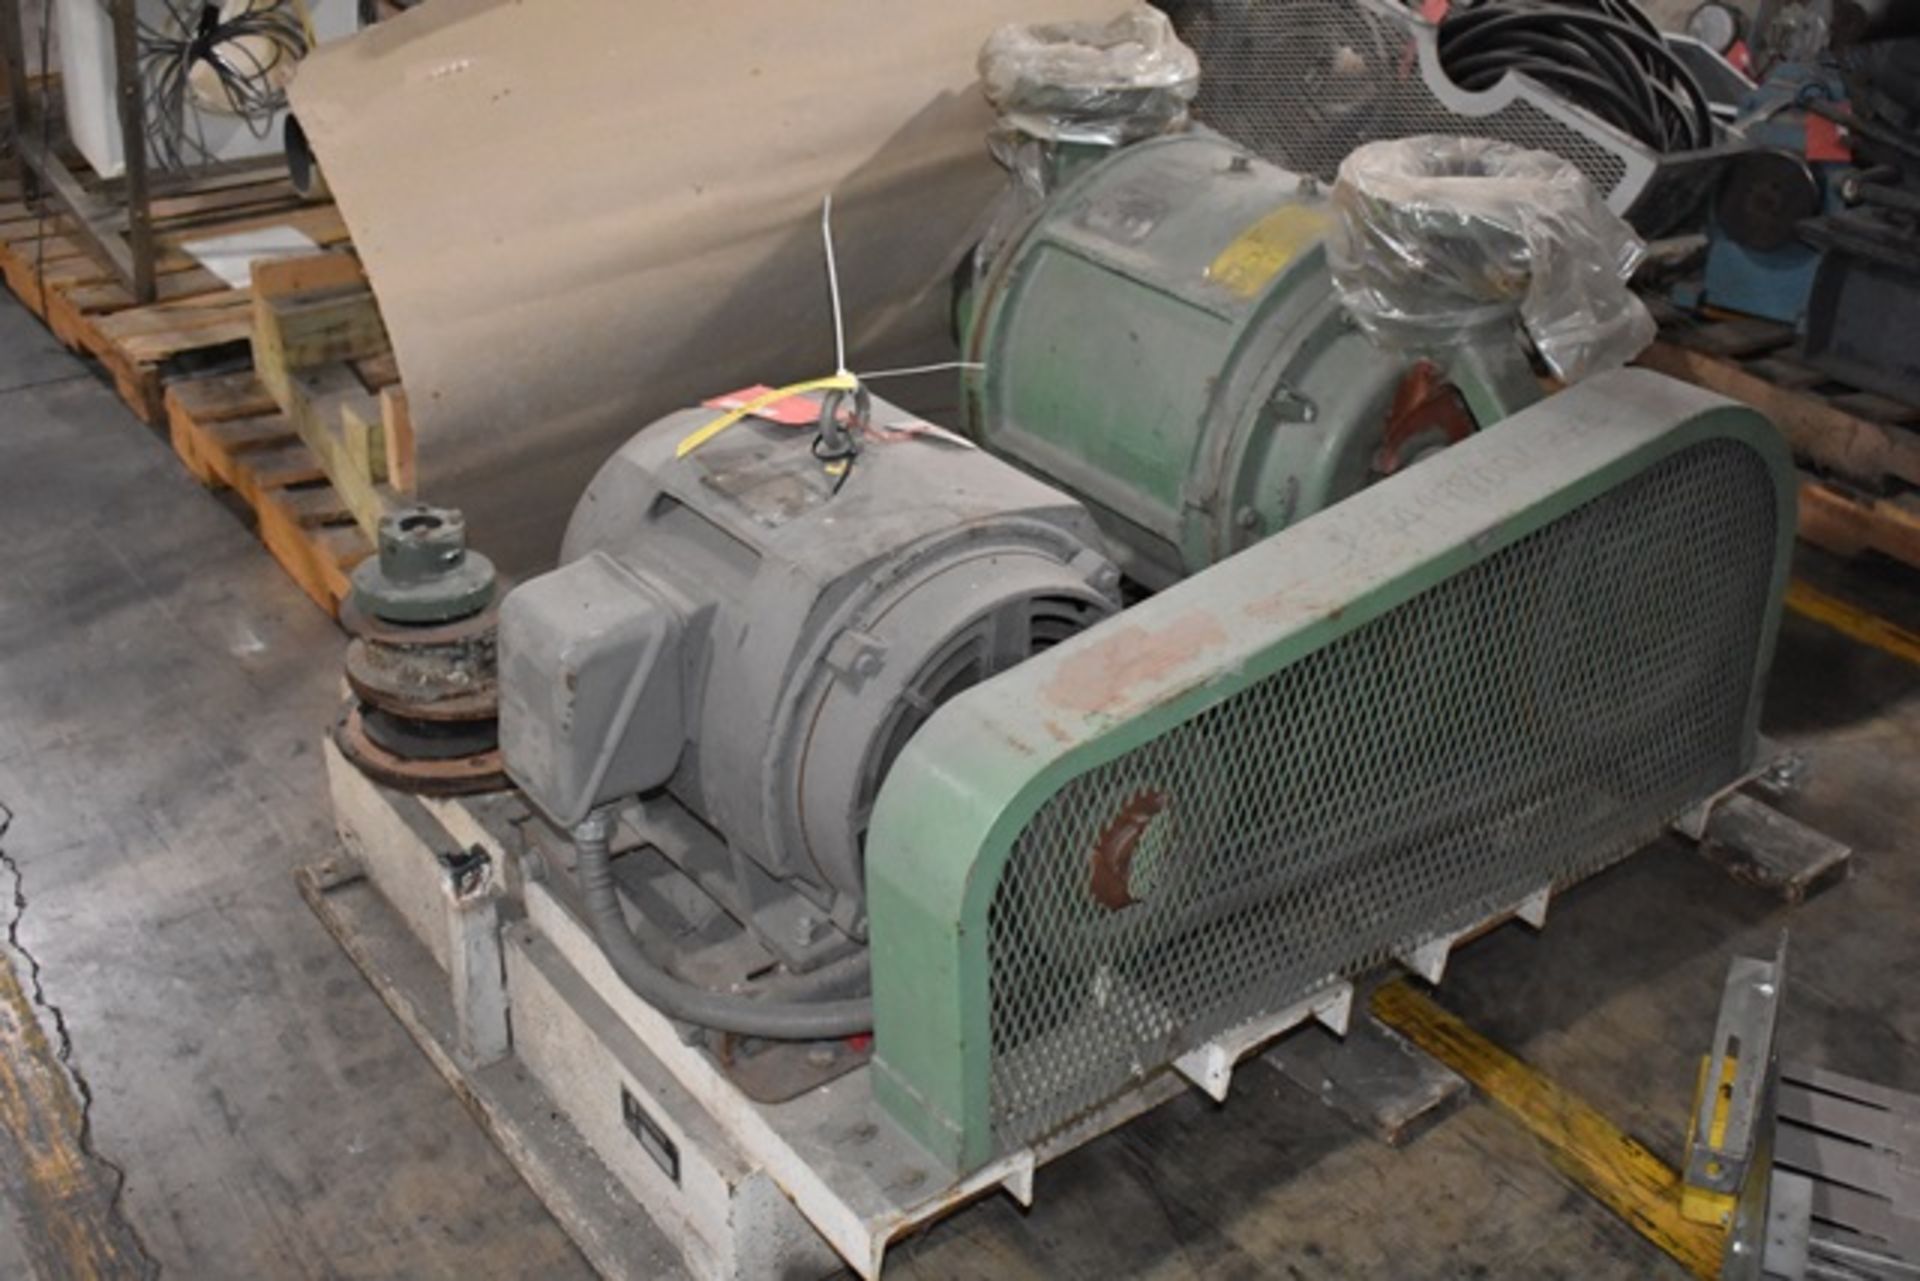 Toshiba 30 HP Motor and Nash Size CL-701 Pump. Rigging/Loading Fee: $25 - Image 3 of 3